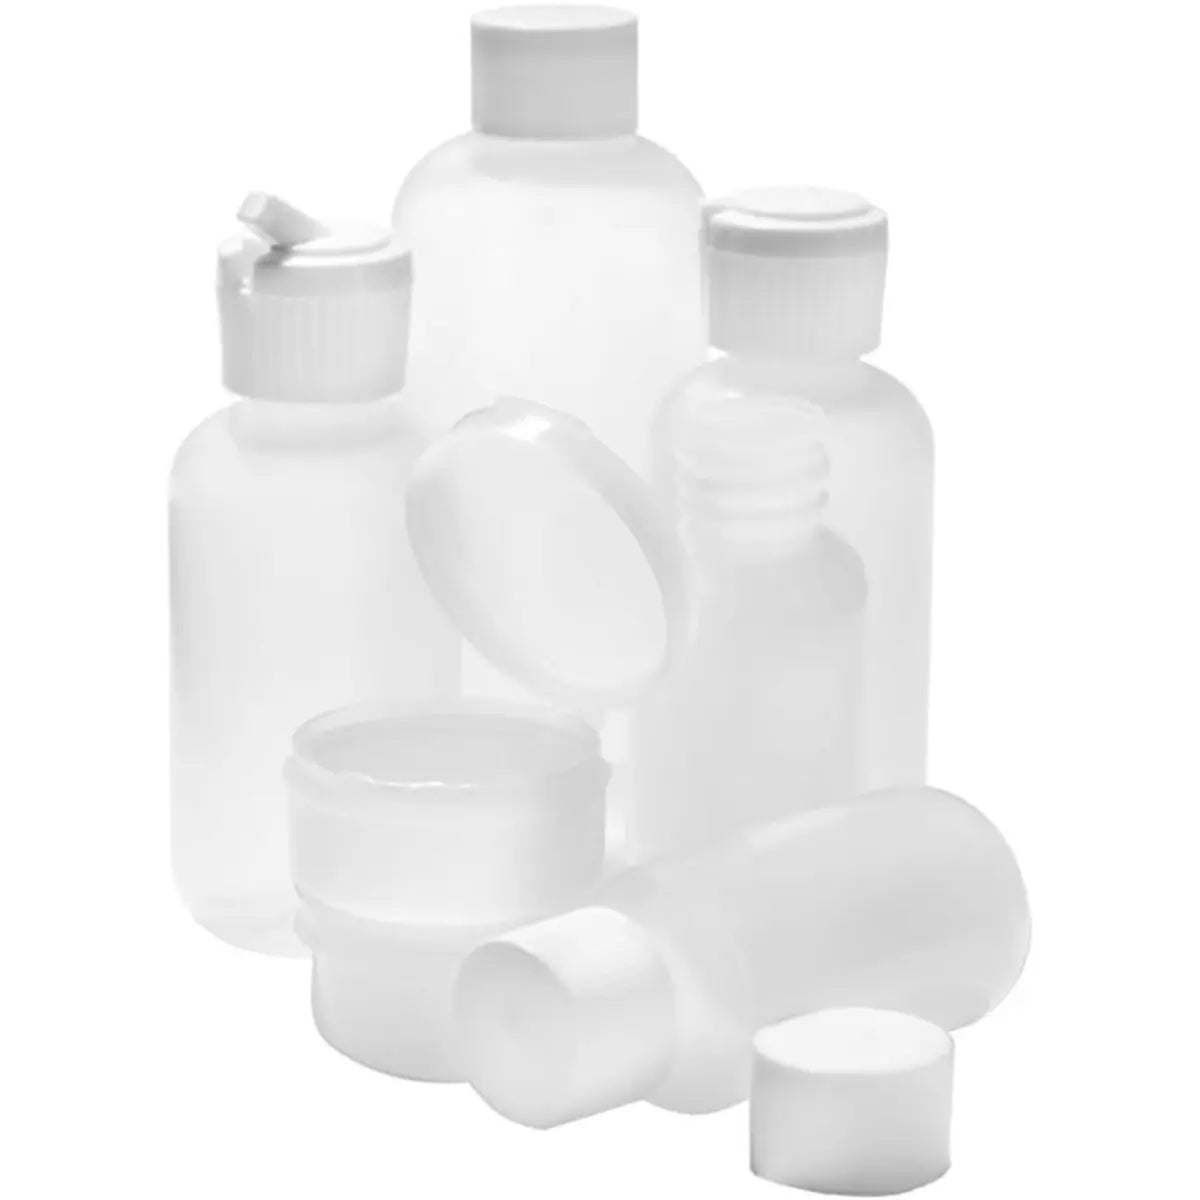 Coghlan's Store N' Pour Contain-Alls (7 Pack), Reusable Bottles and Containers Coghlan's